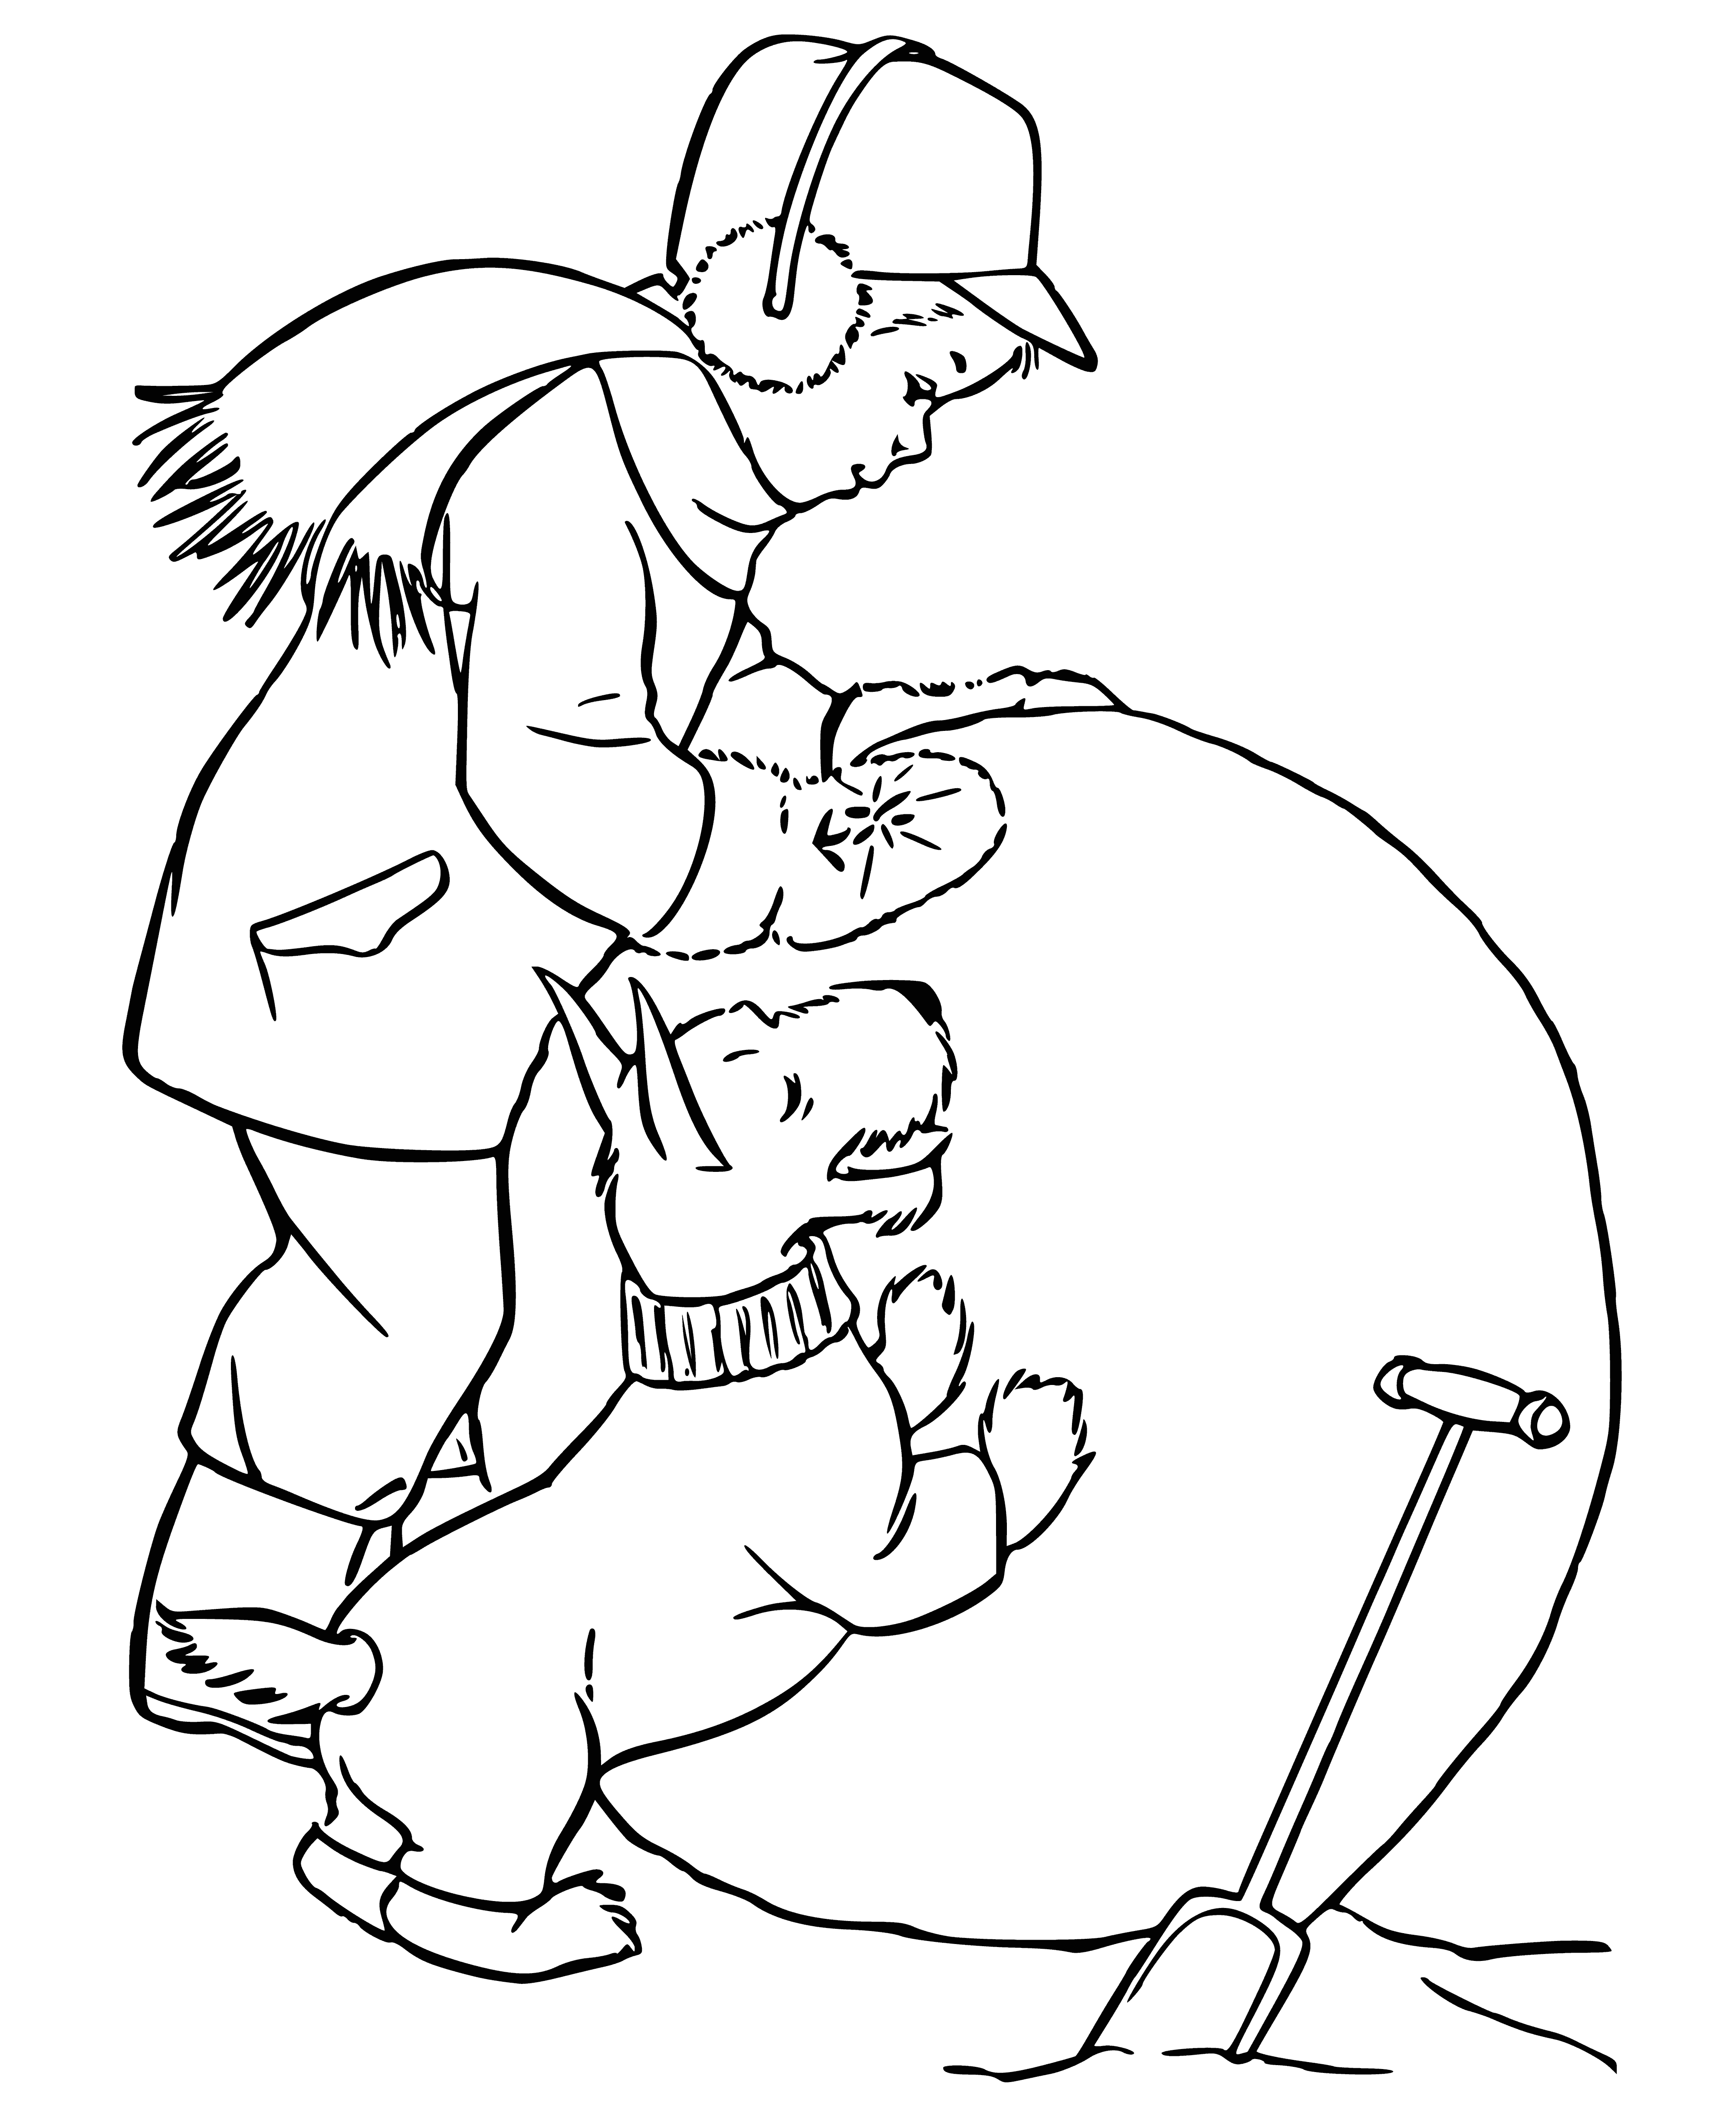 A boy rolling a snowball coloring page